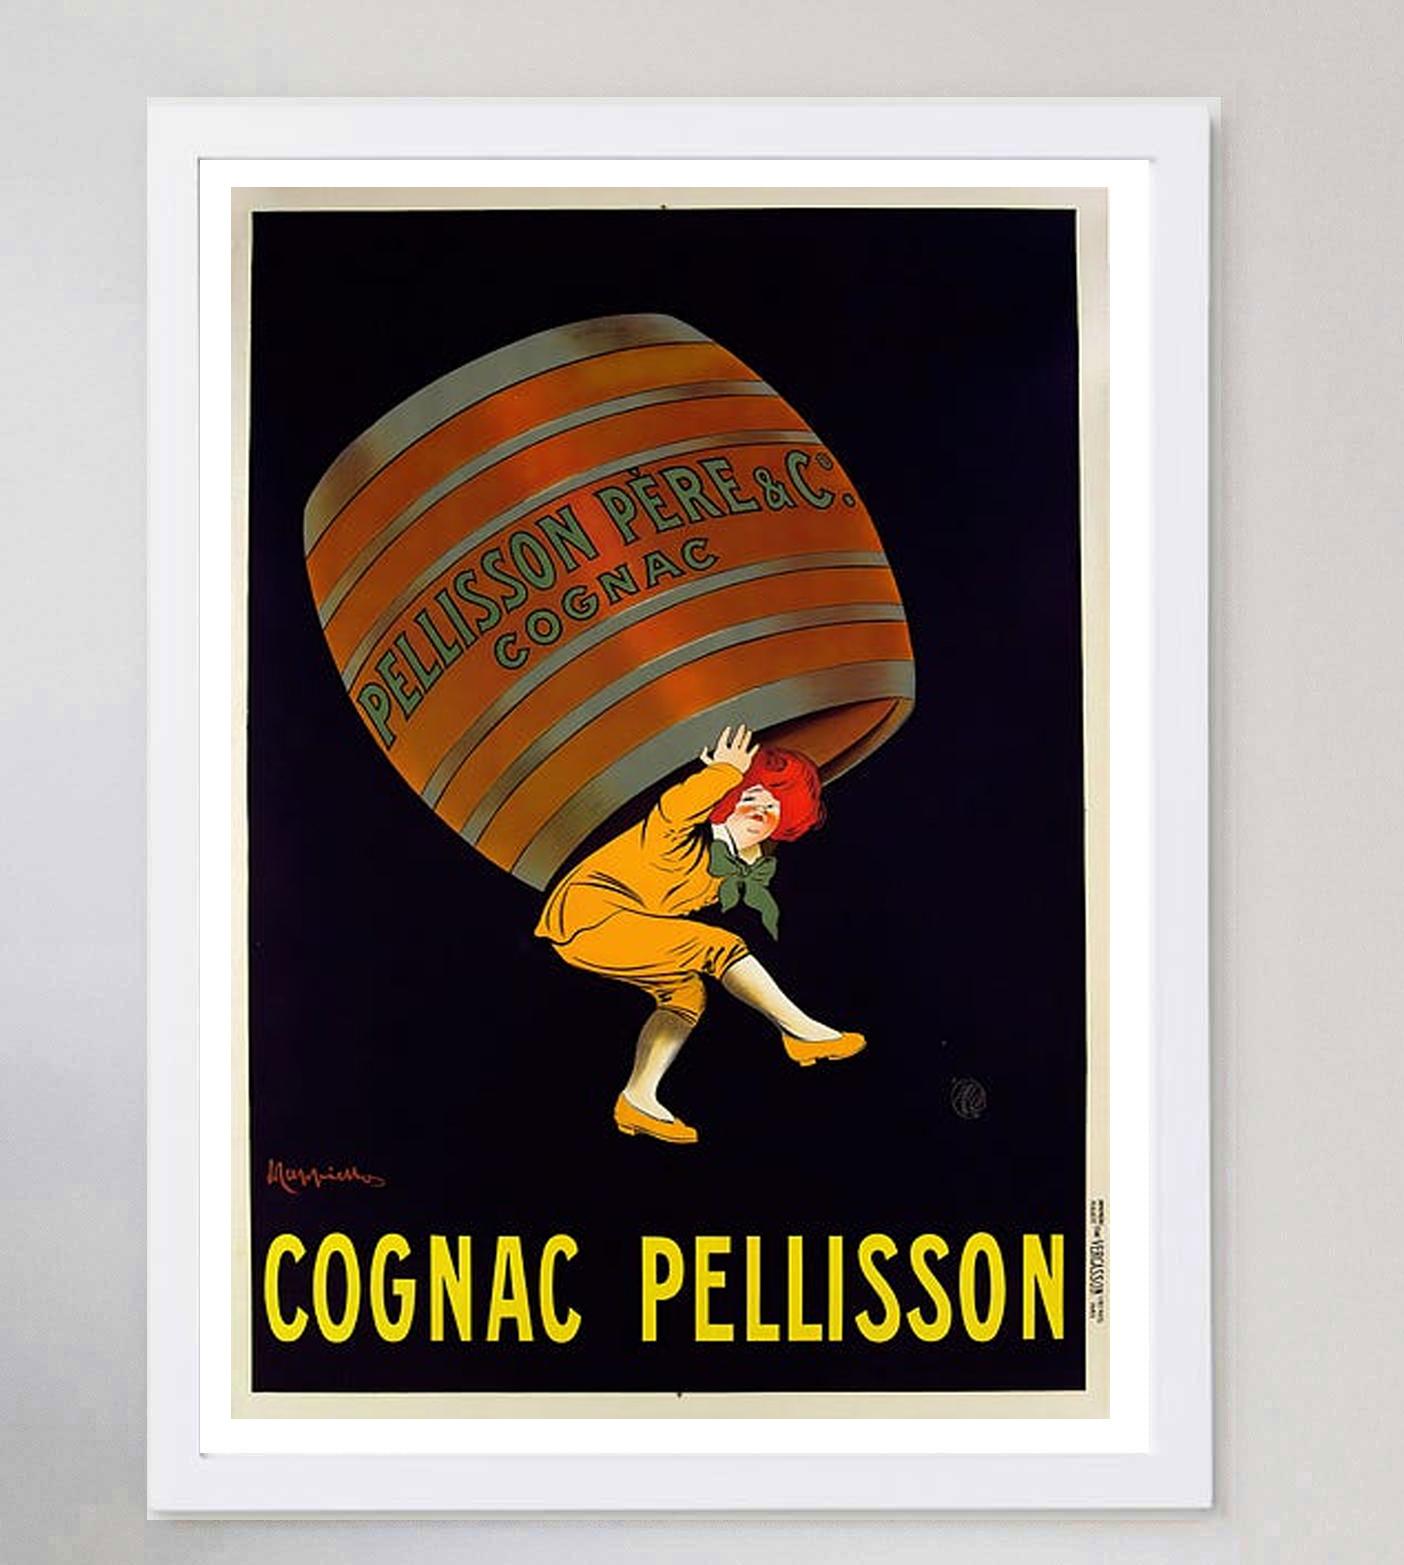 1905 Cognac Pellisson Original Vintage Poster In Good Condition For Sale In Winchester, GB